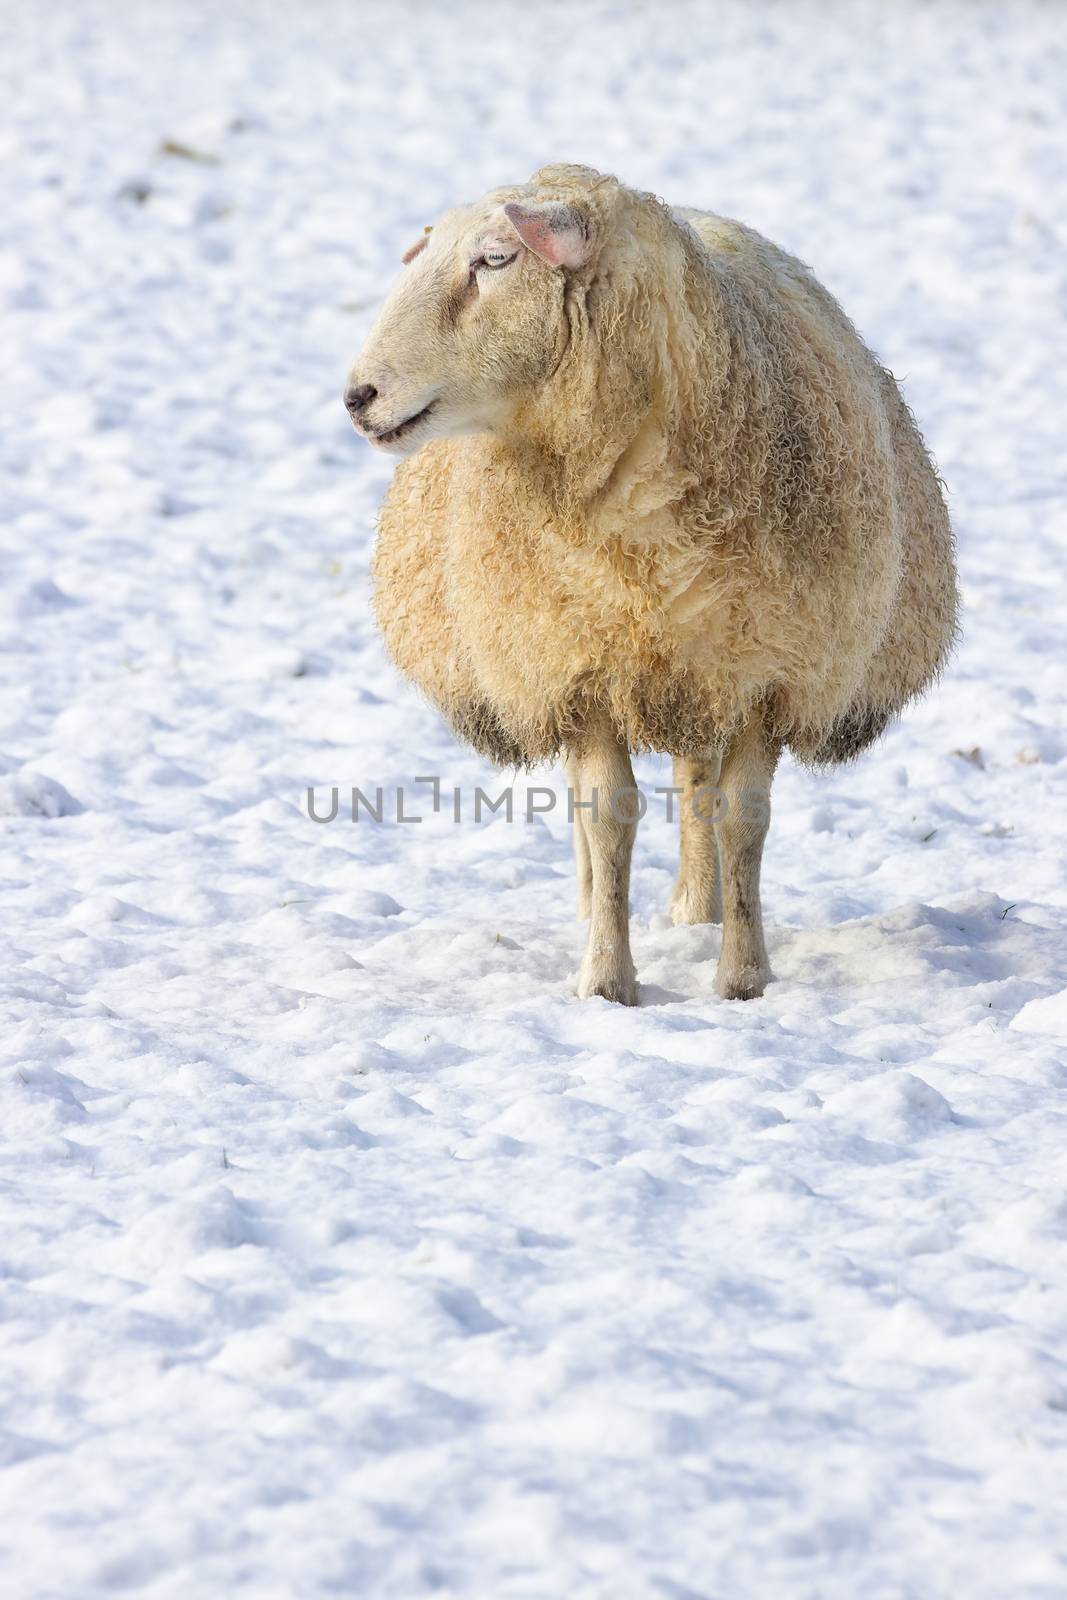 One sheep standing in meadow covered with snow by BenSchonewille